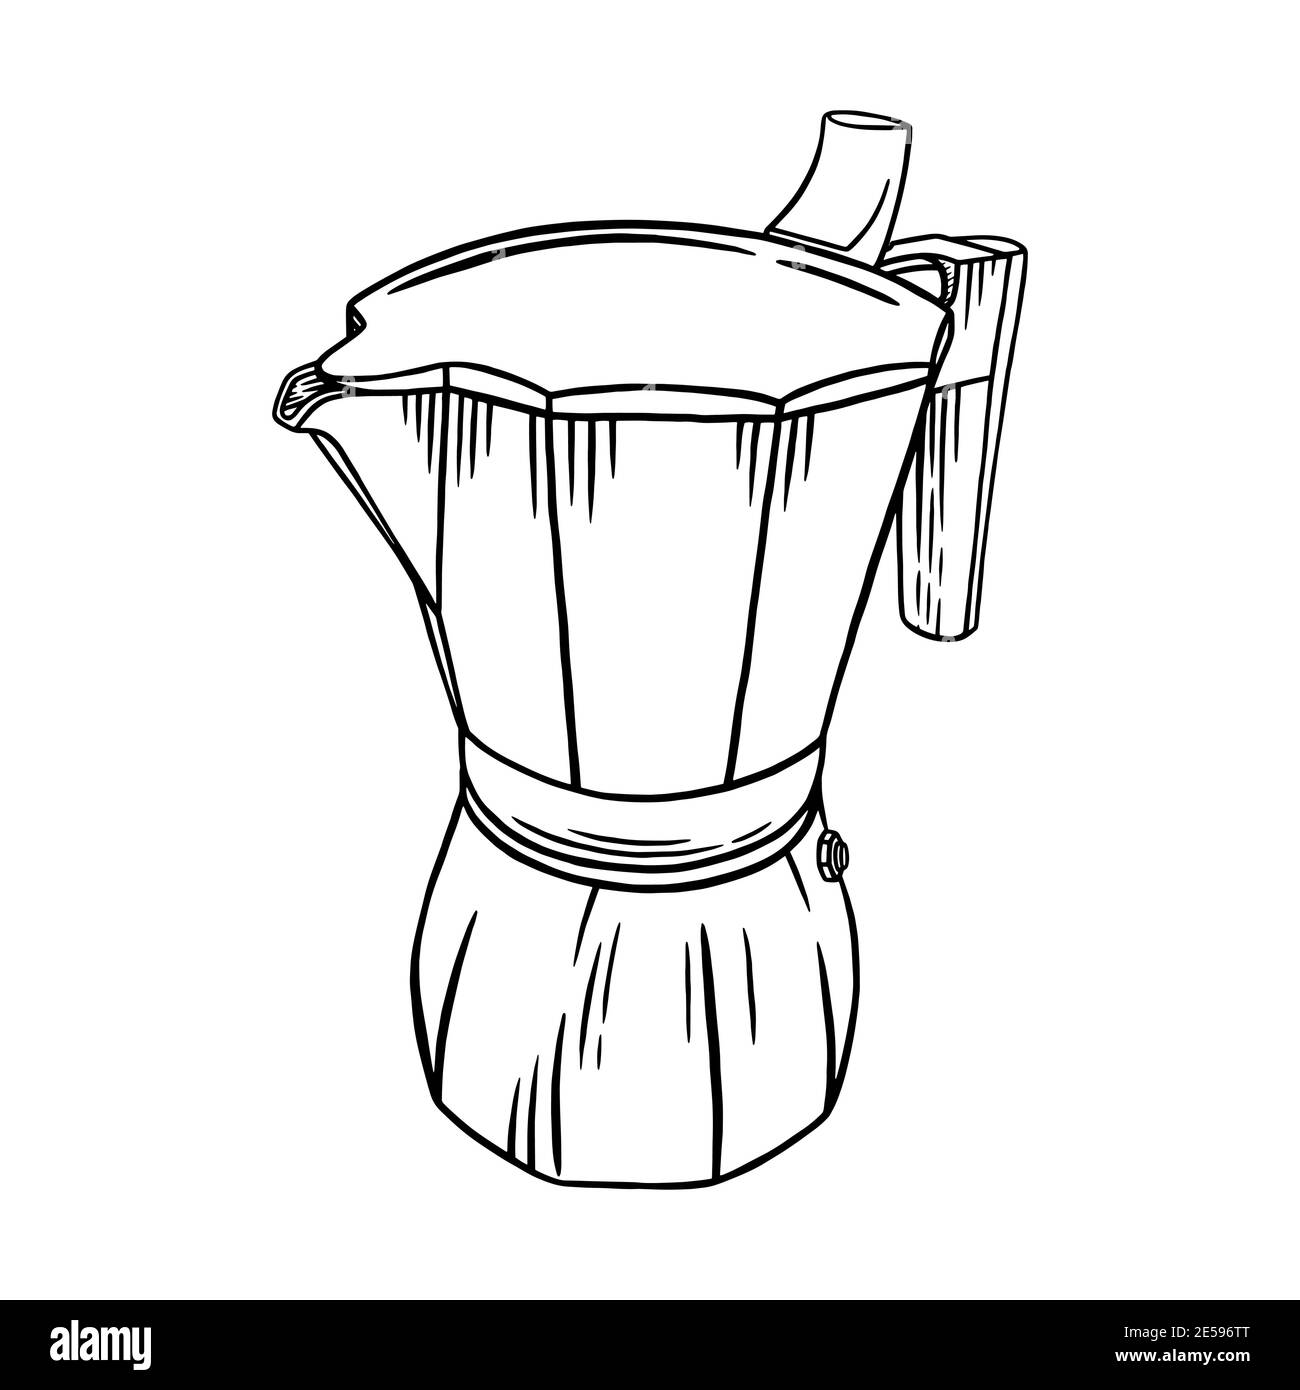 Coffee moka pot engraved illustration. Coffee brew pot isolated in white background. Black and white sketch vector illustration Stock Vector